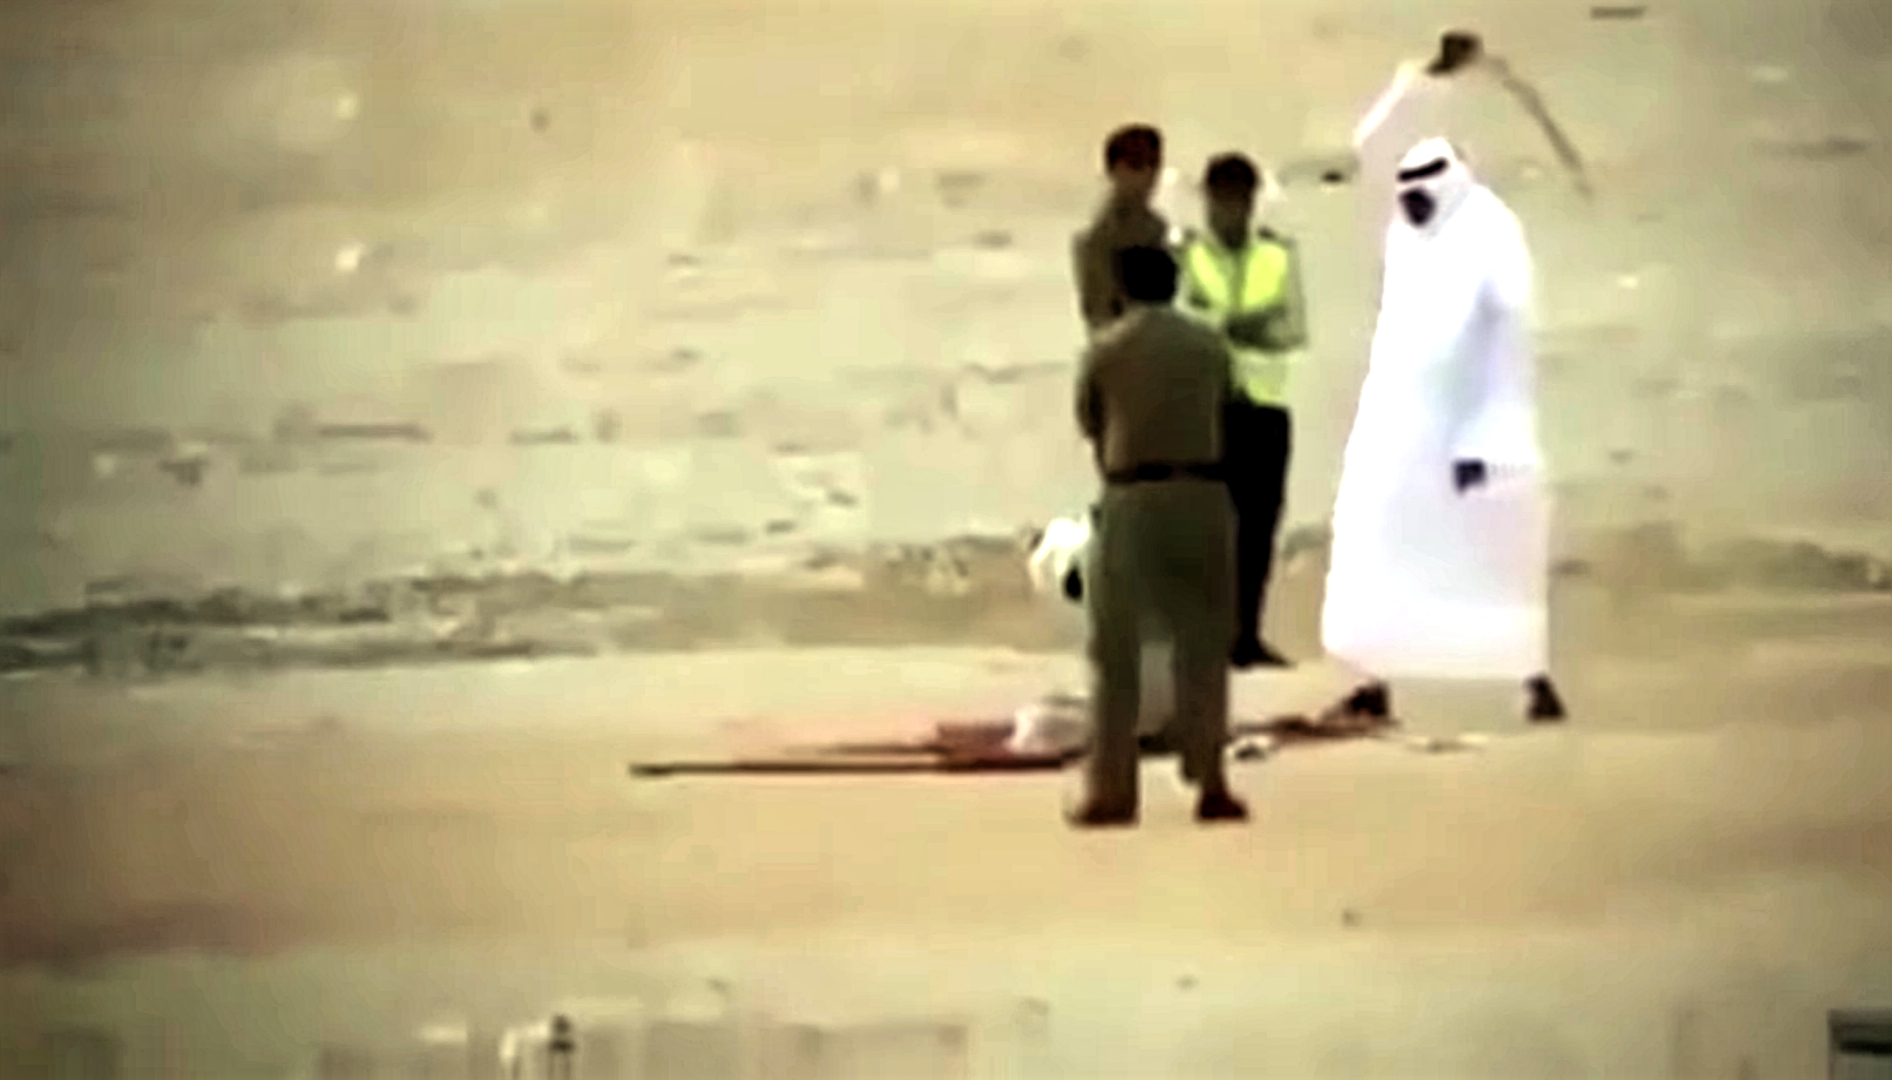 Public beheading is a punishment in Saudi Arabia for many crimes.